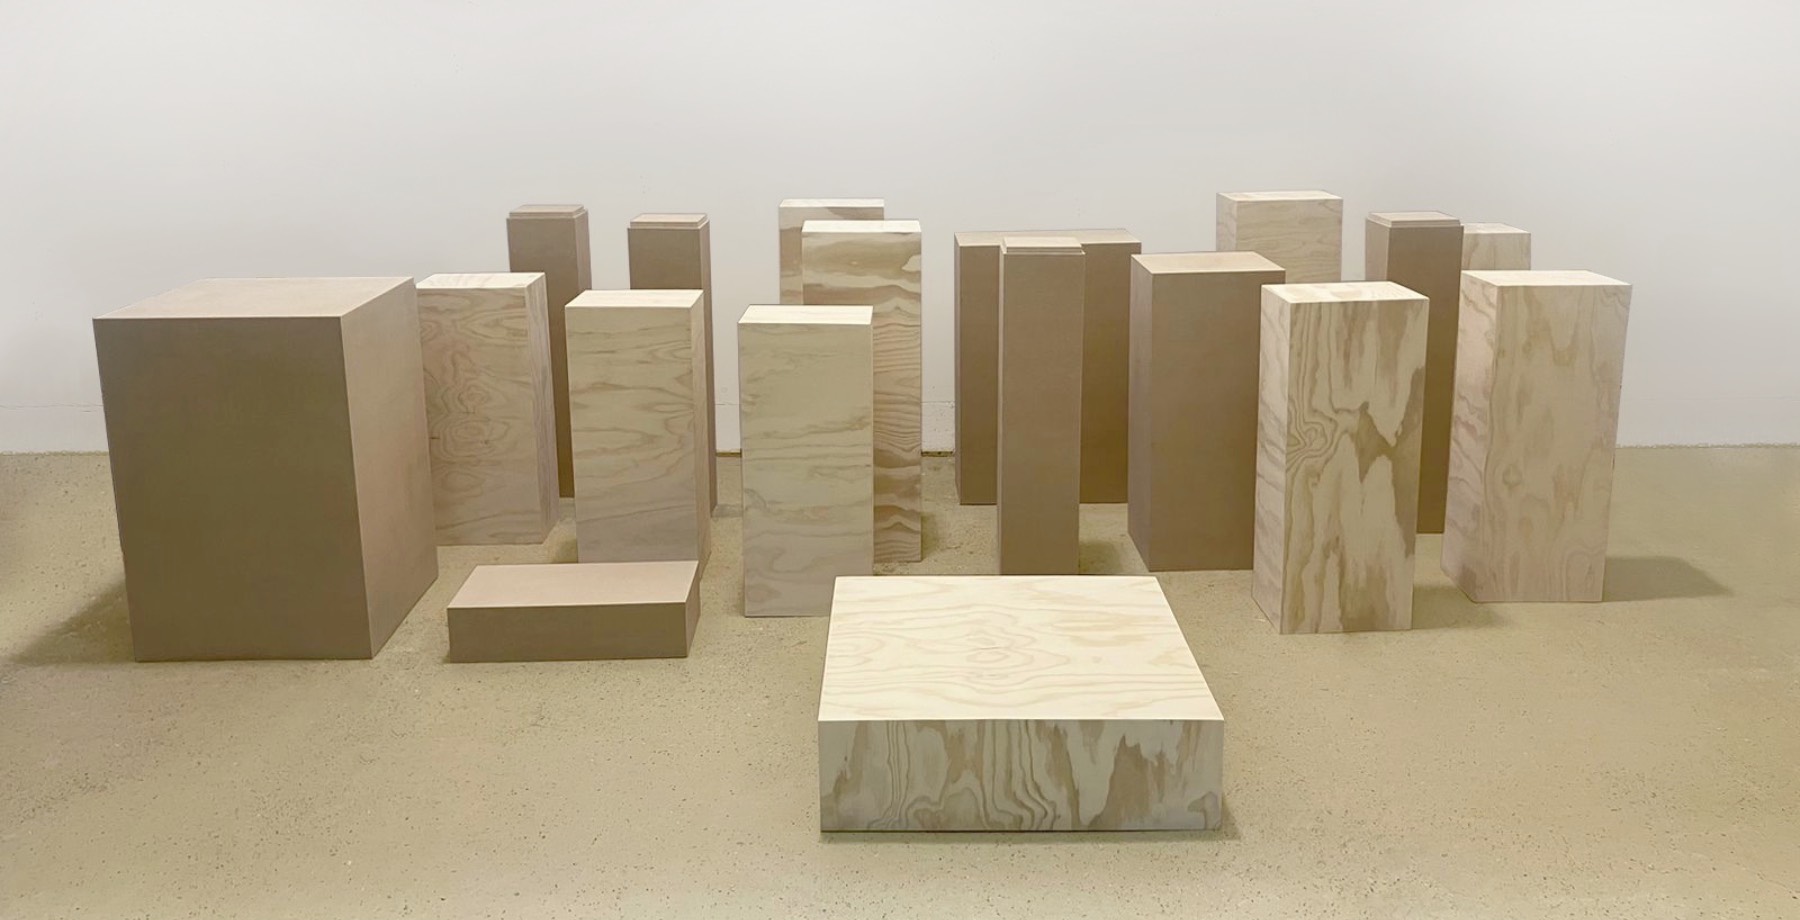 A group of pedestals made by Aconite